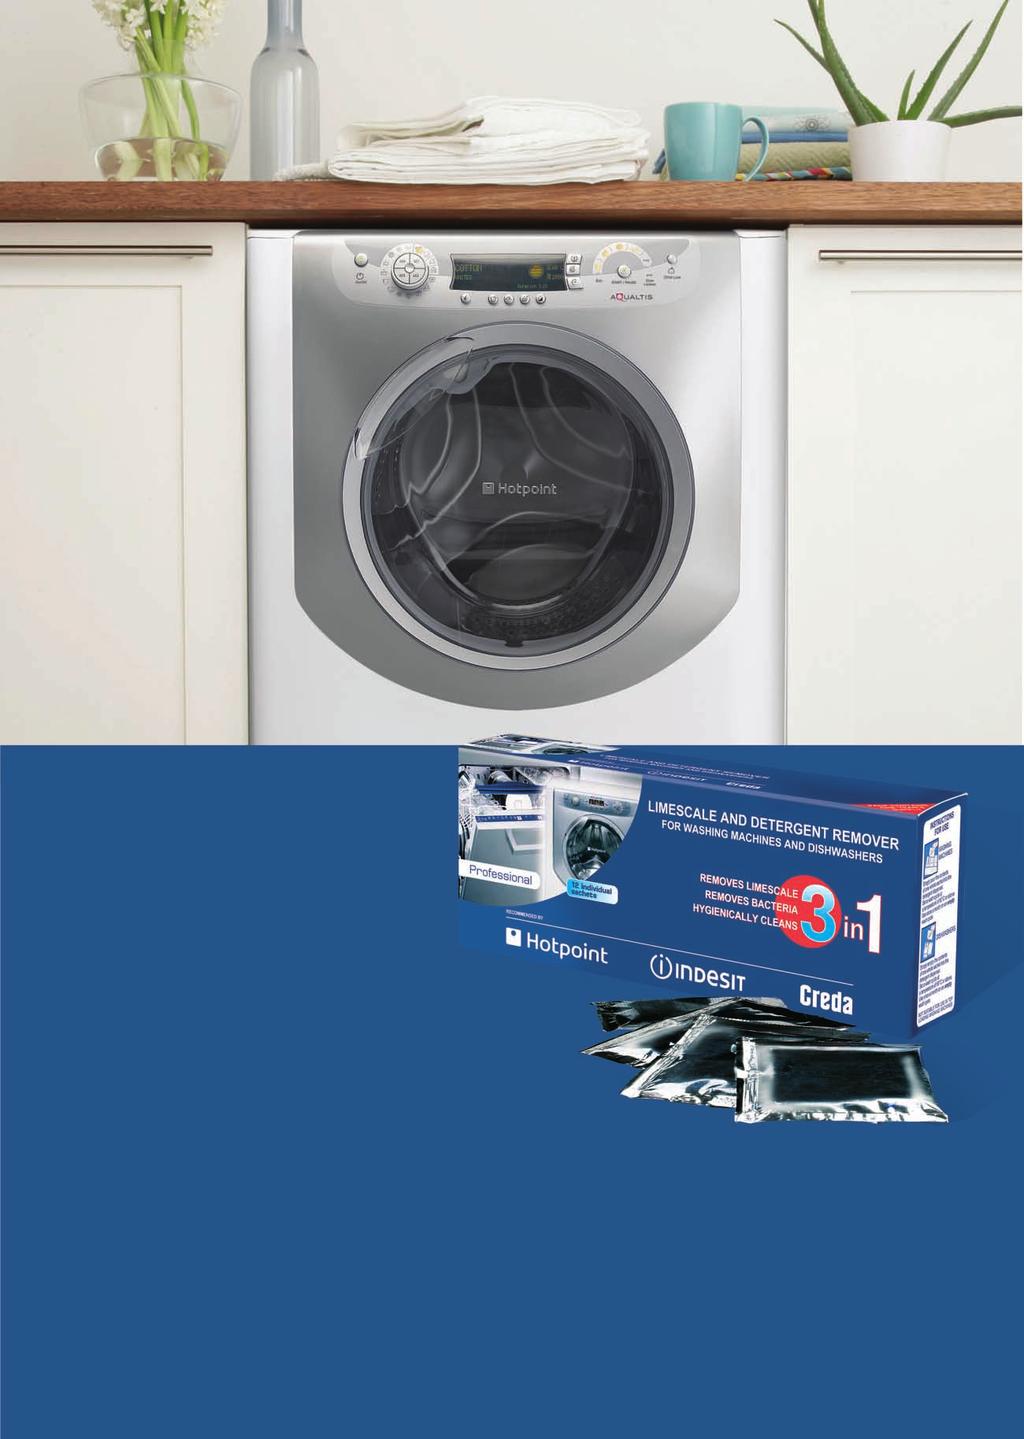 Laundry Do you know that limescale build-up increases energy consumption and can cause premature product failure?